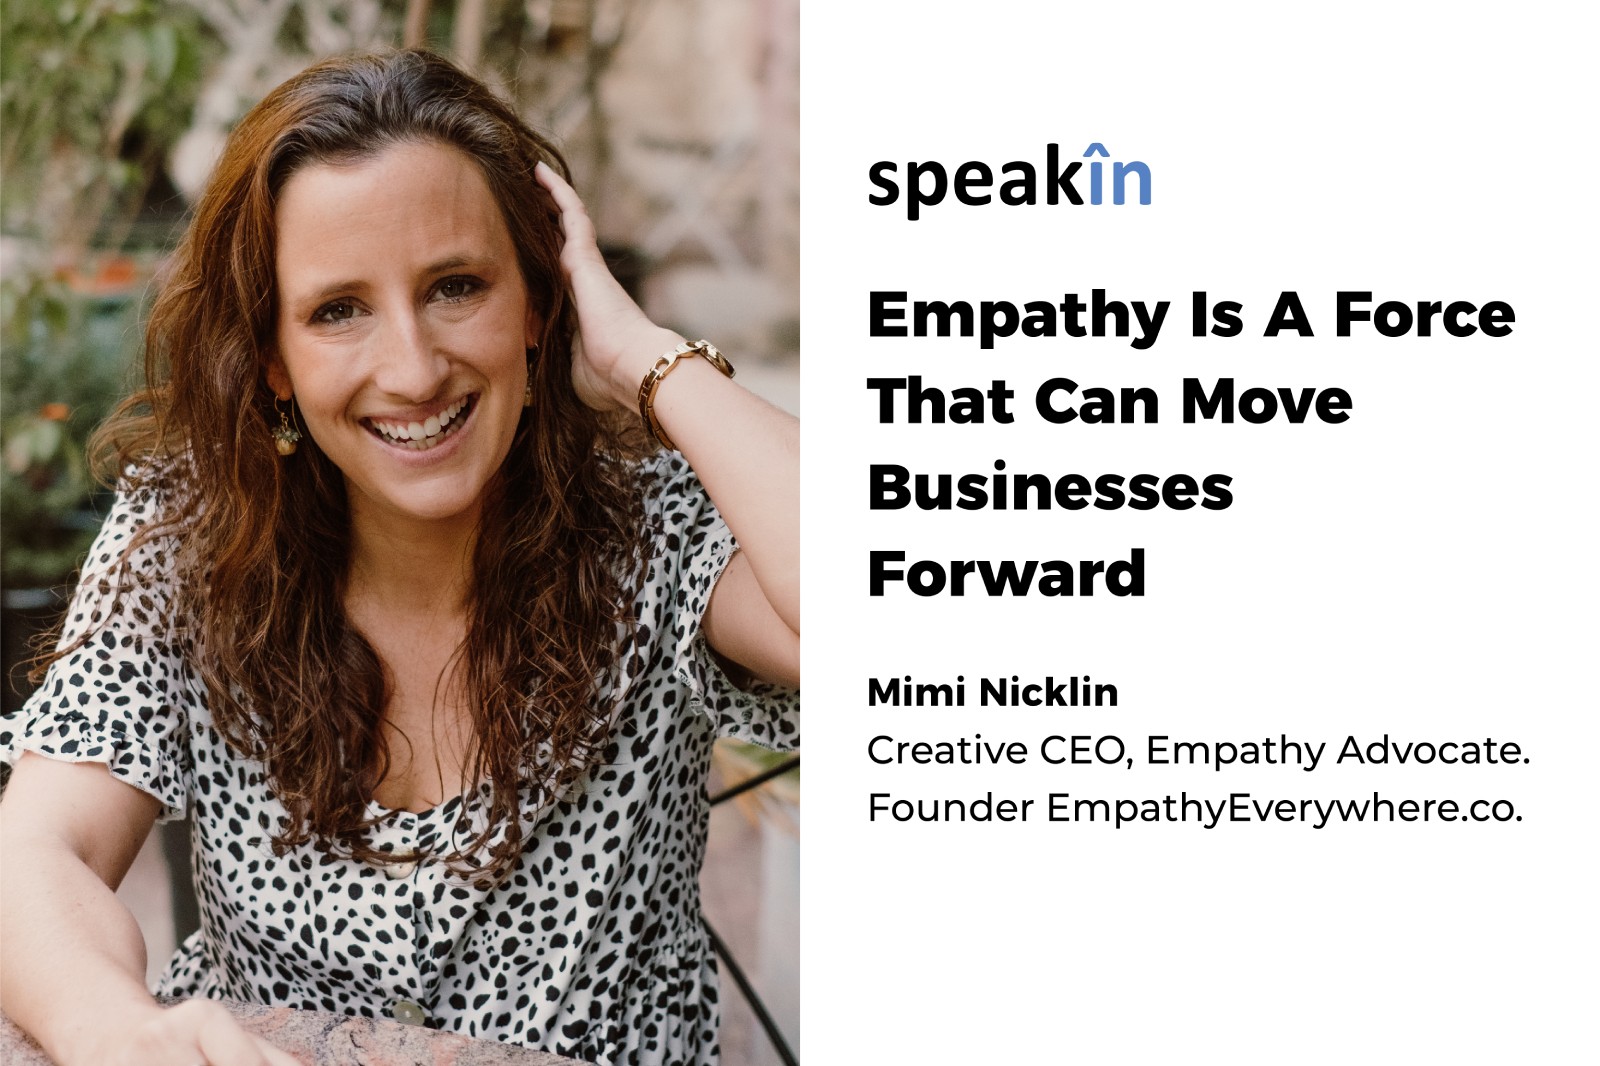 Empathy Is A Force That Can Move Businesses Forward